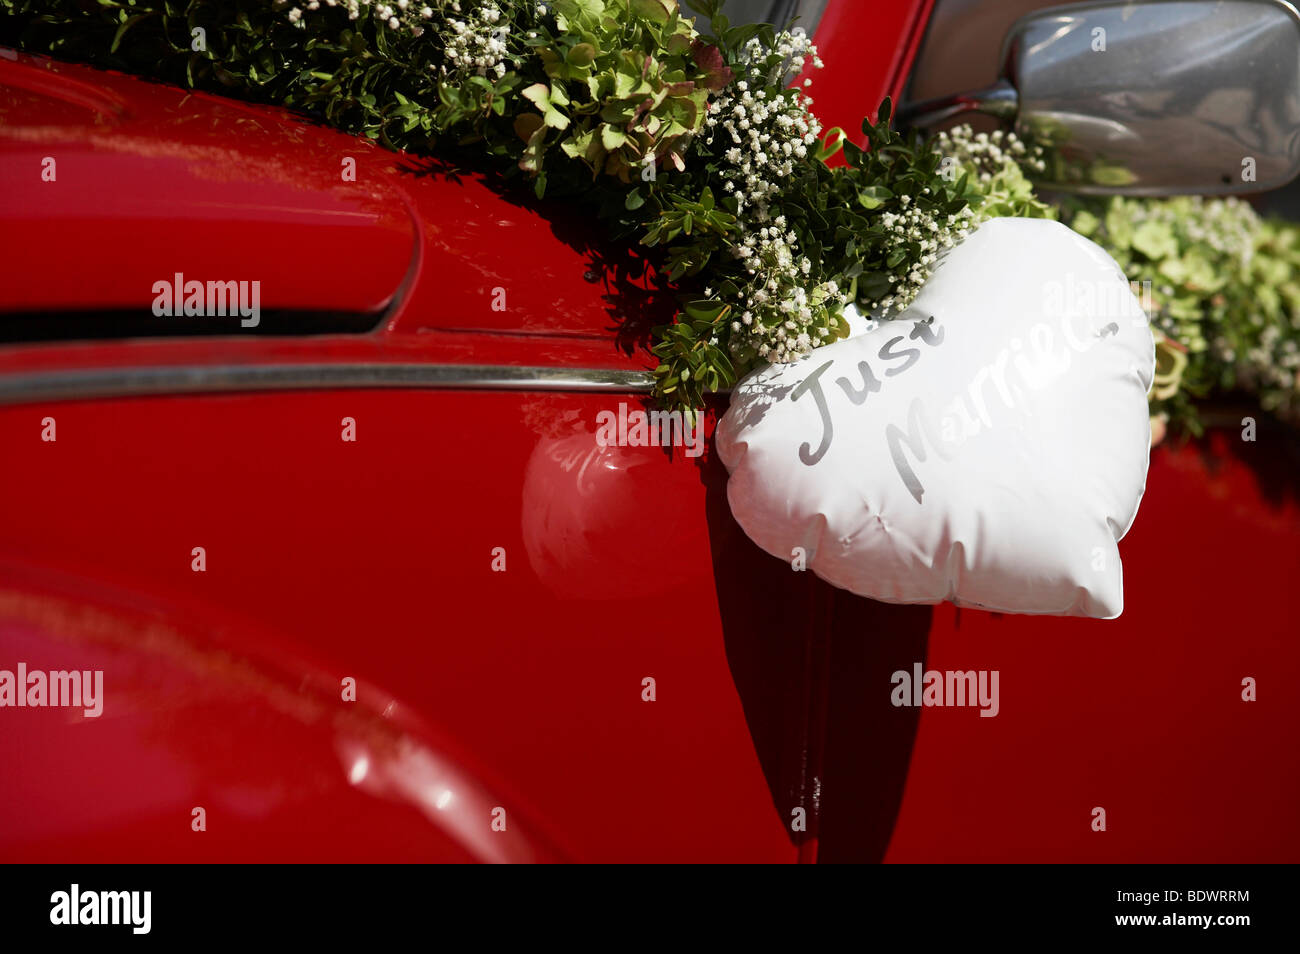 Red VW beetle with a white heart, wedding car Stock Photo